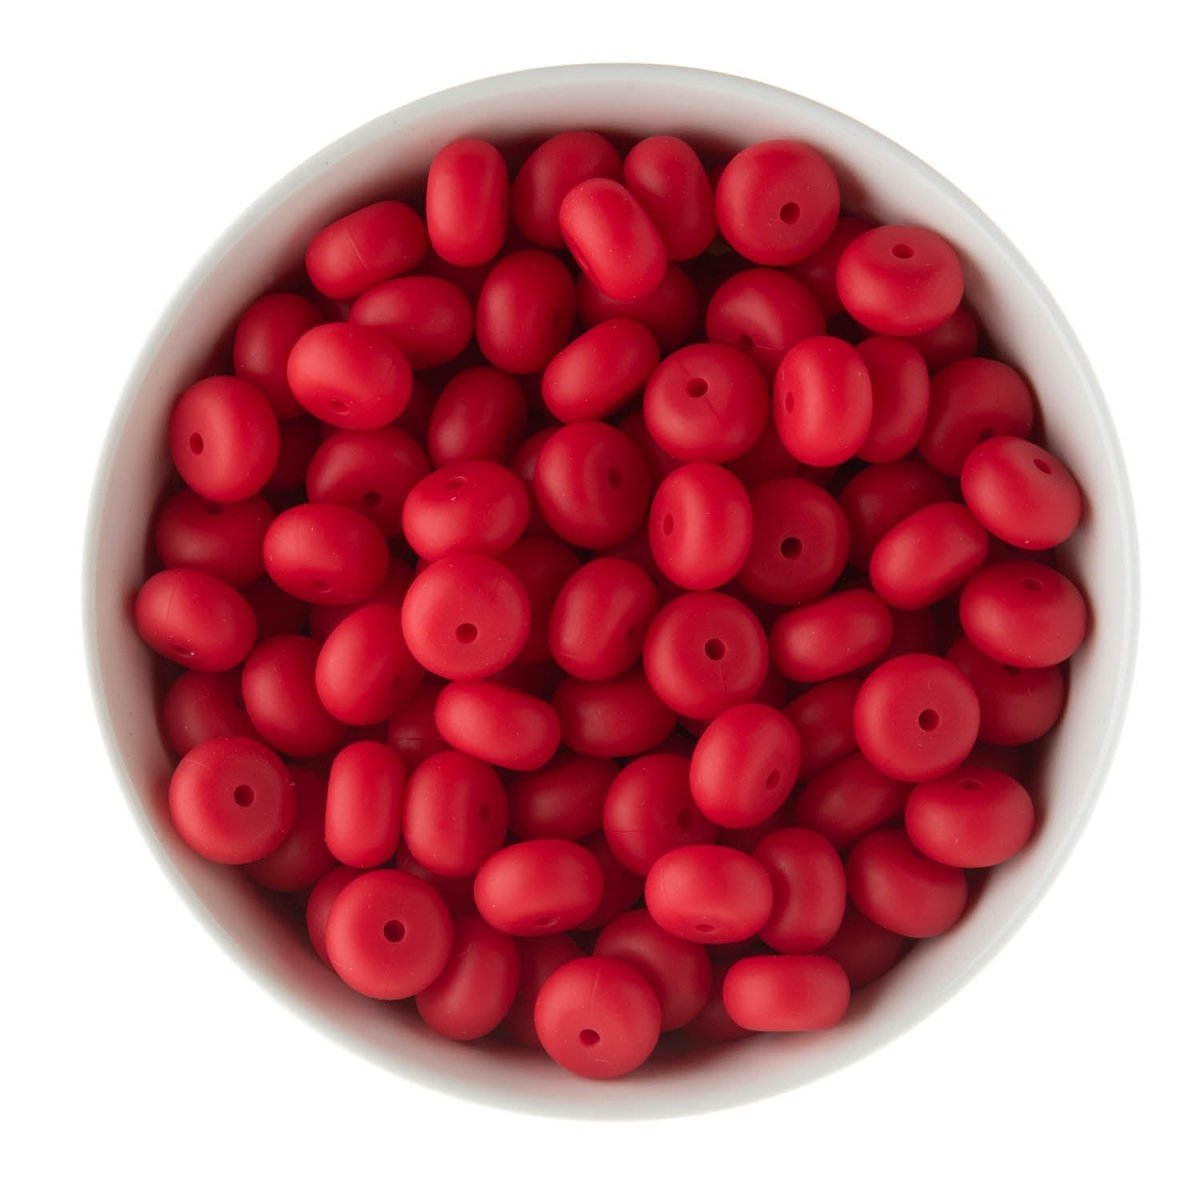 Silicone Shape Beads Abacus 14mm Cherry Red from Cara & Co Craft Supply